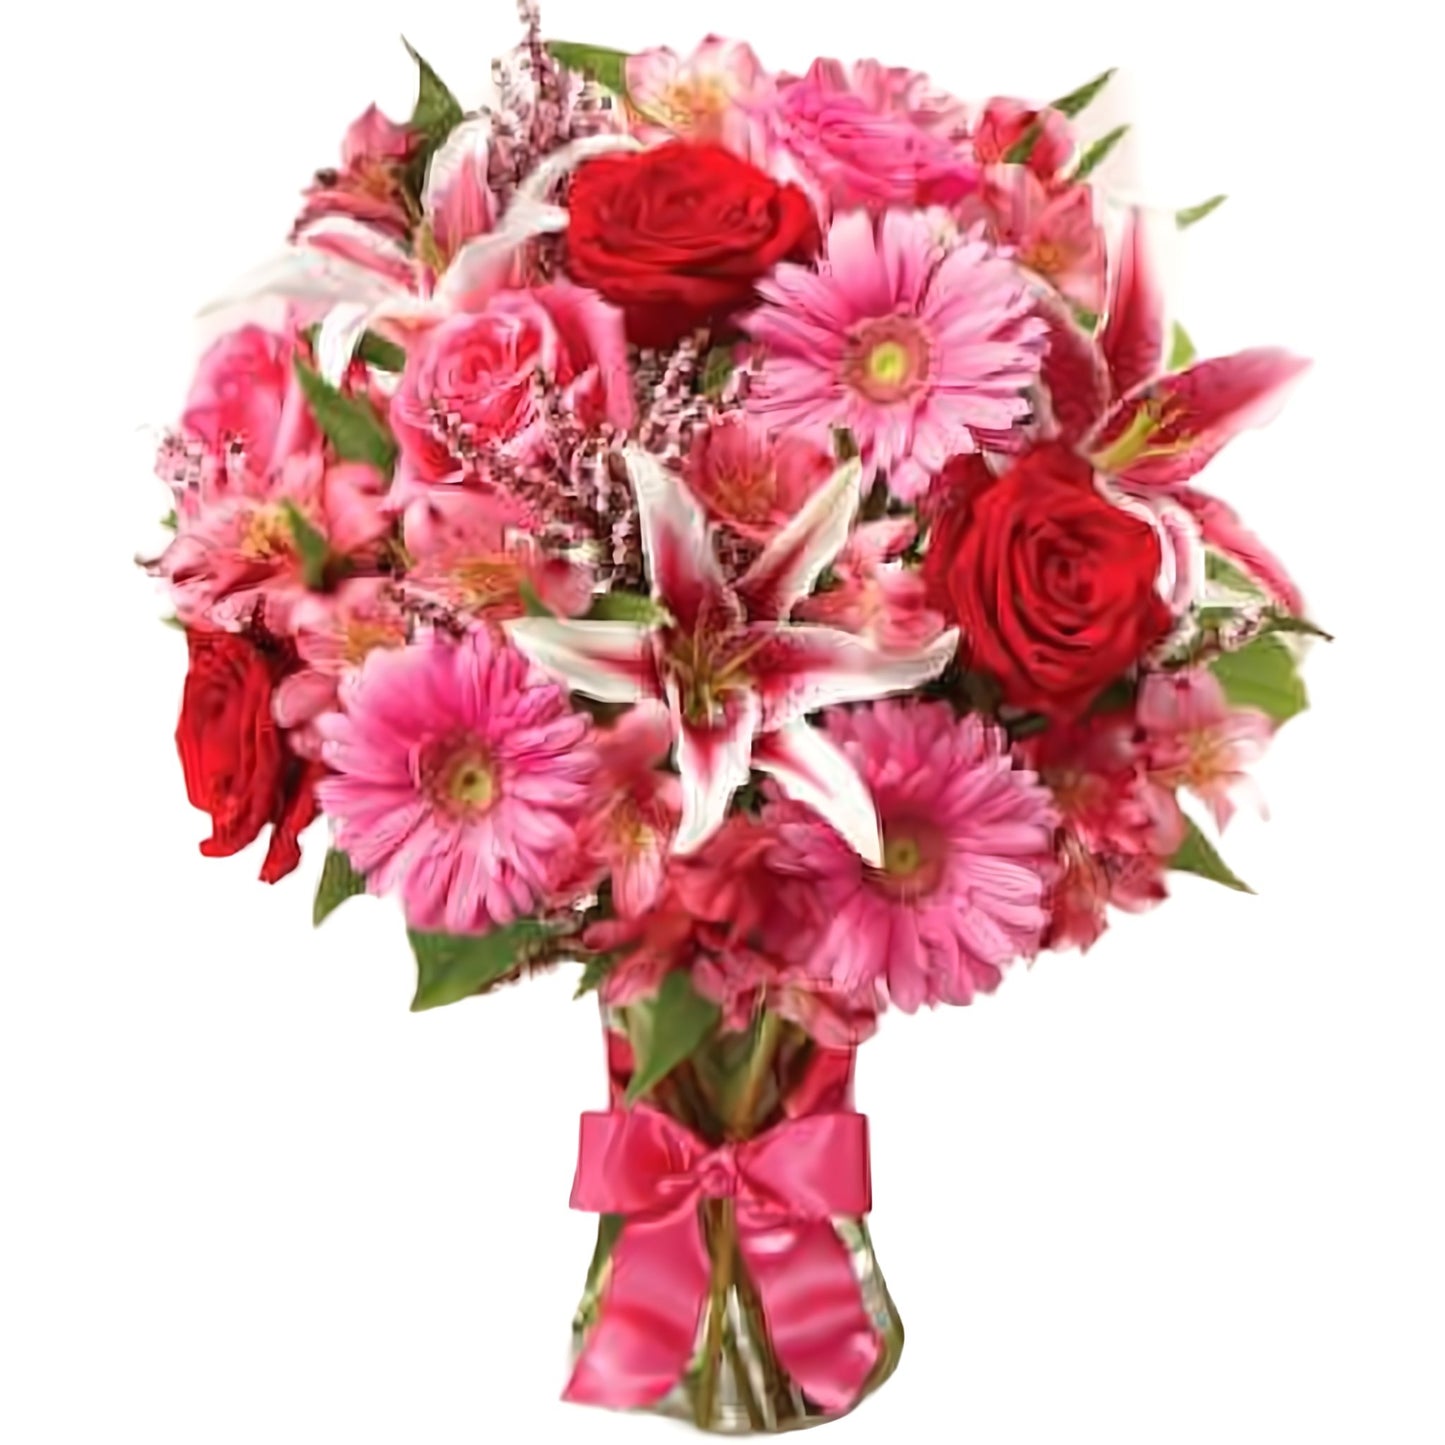 Colors Of Love - Floral Arrangement - Flower Delivery Brooklyn